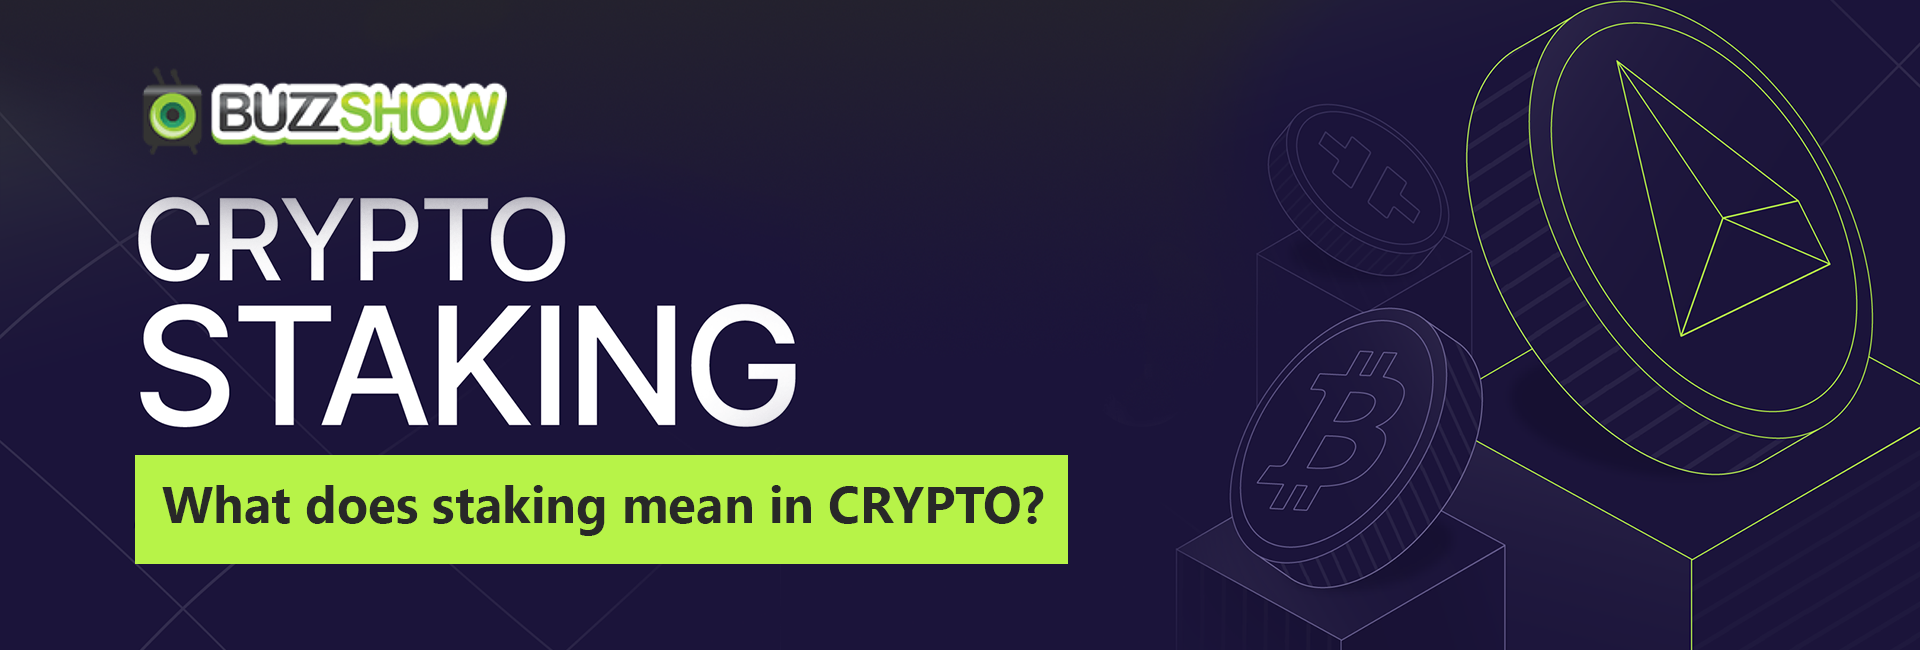 What does Staking mean in Crypto